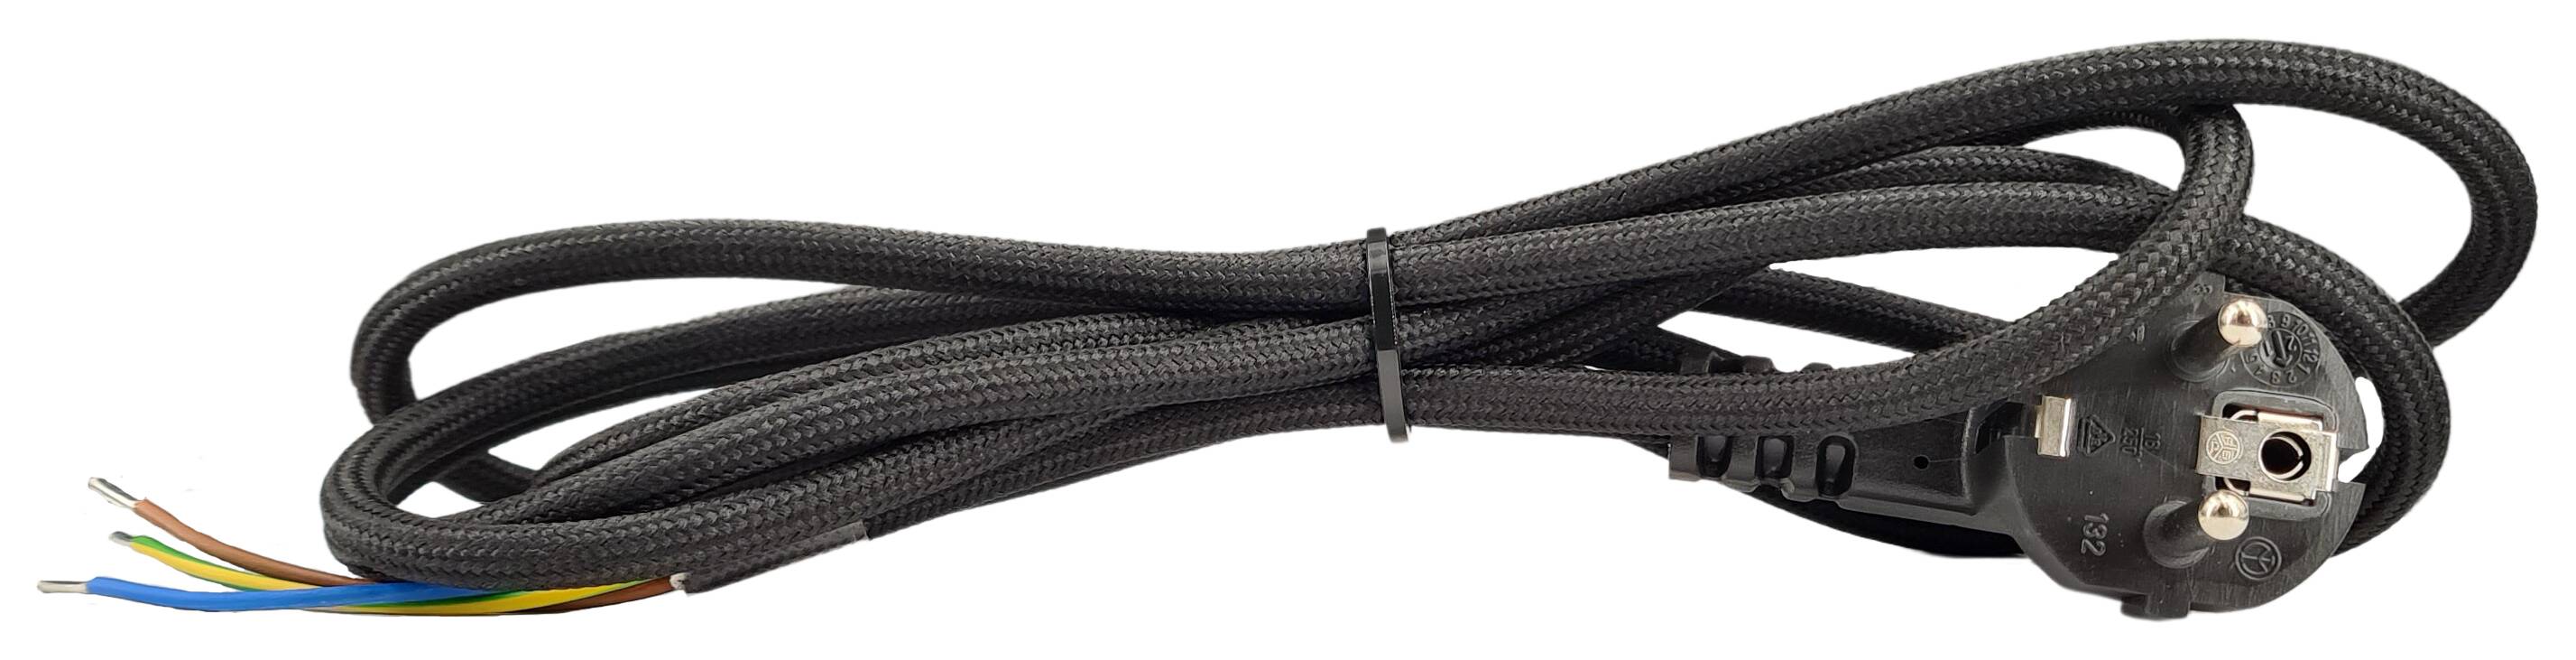 cord-set 3G 0,75/2000 round with schuko angled plug textile coated cable black